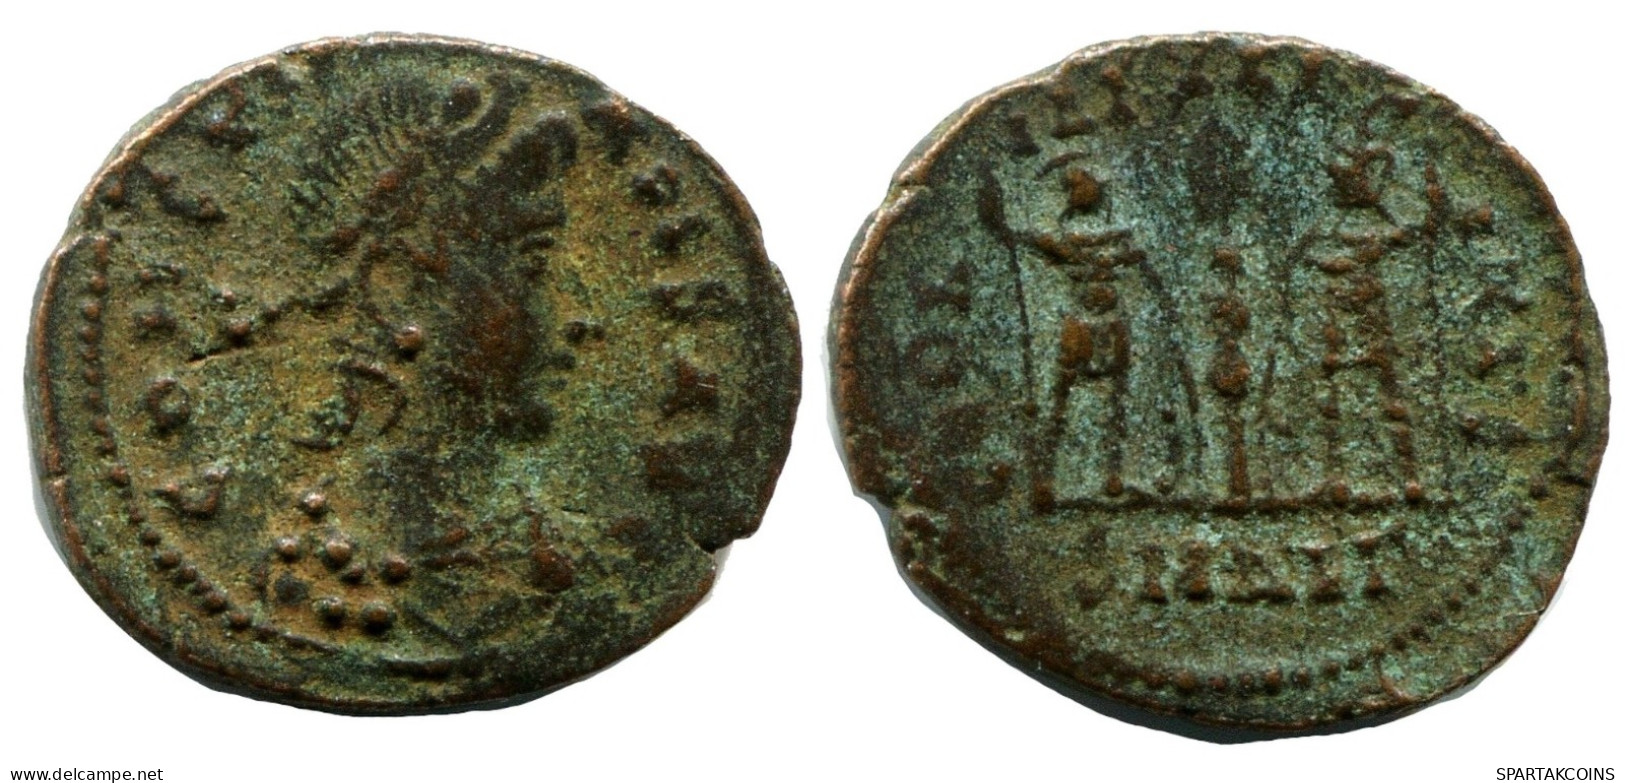 CONSTANS MINTED IN ALEKSANDRIA FOUND IN IHNASYAH HOARD EGYPT #ANC11460.14.U.A - The Christian Empire (307 AD To 363 AD)